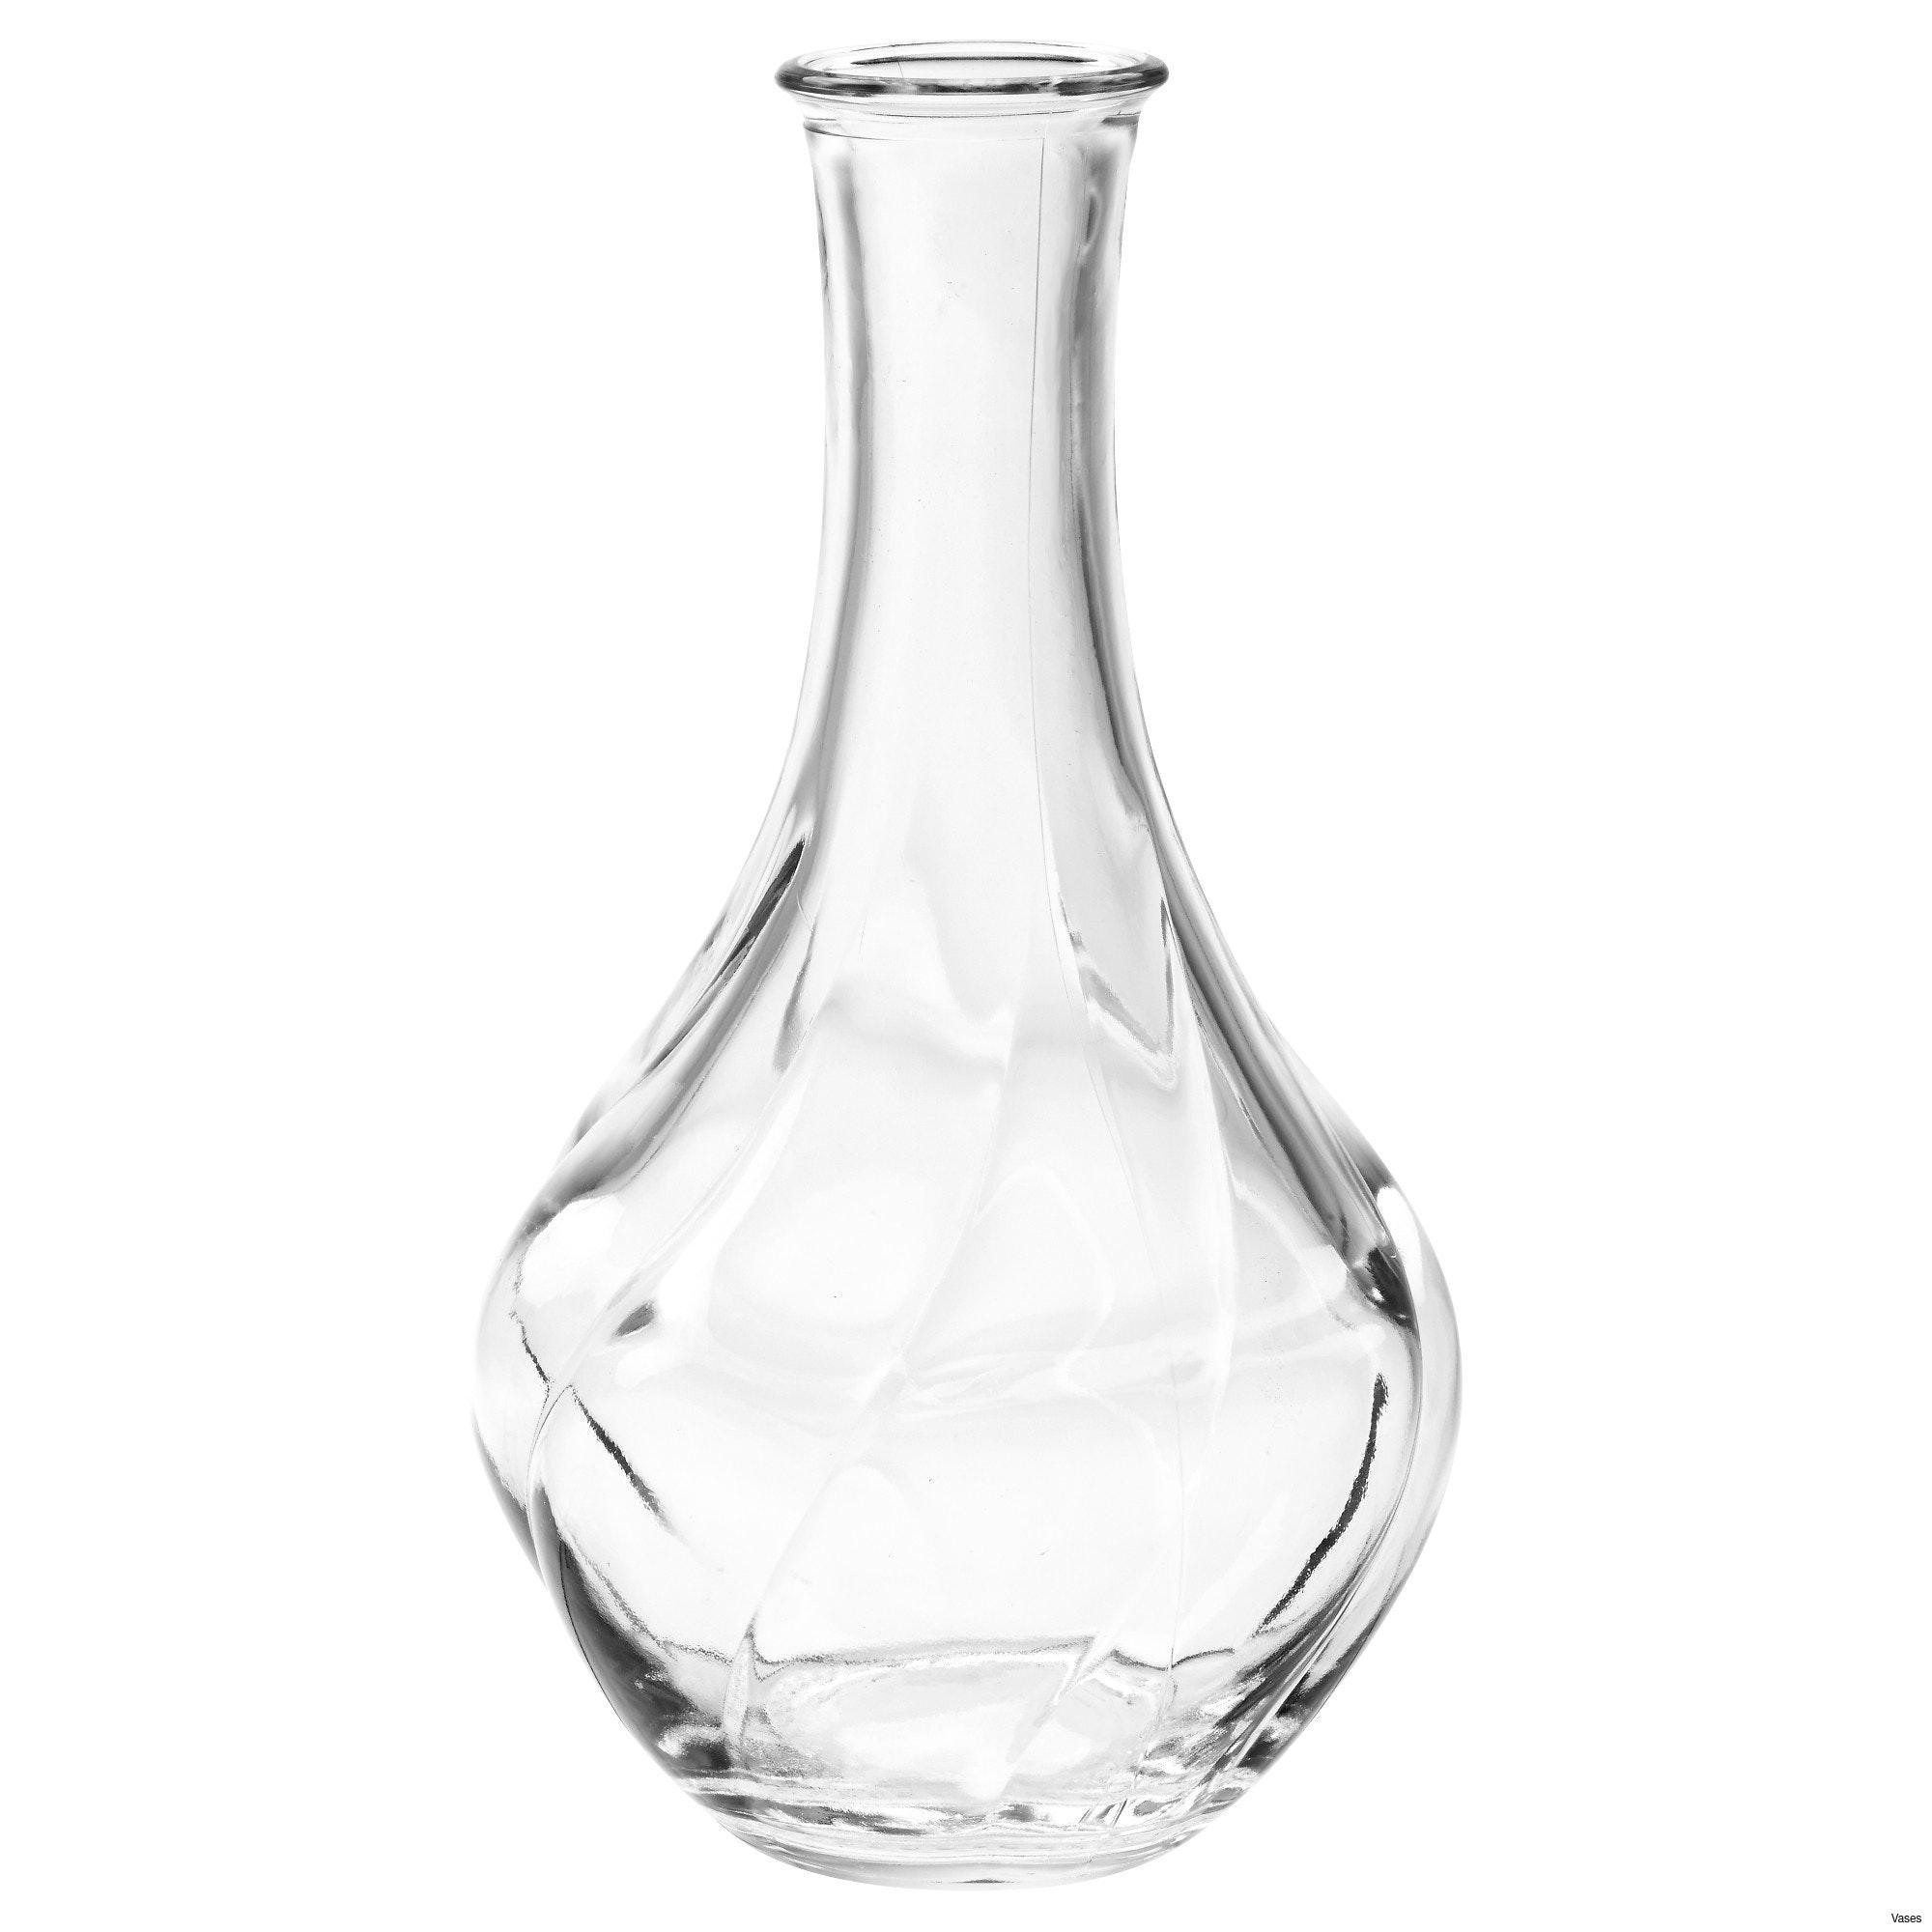 small glass vases amazon of photograph of glass vases with lids vases artificial plants with regard to glass vases with lids collection